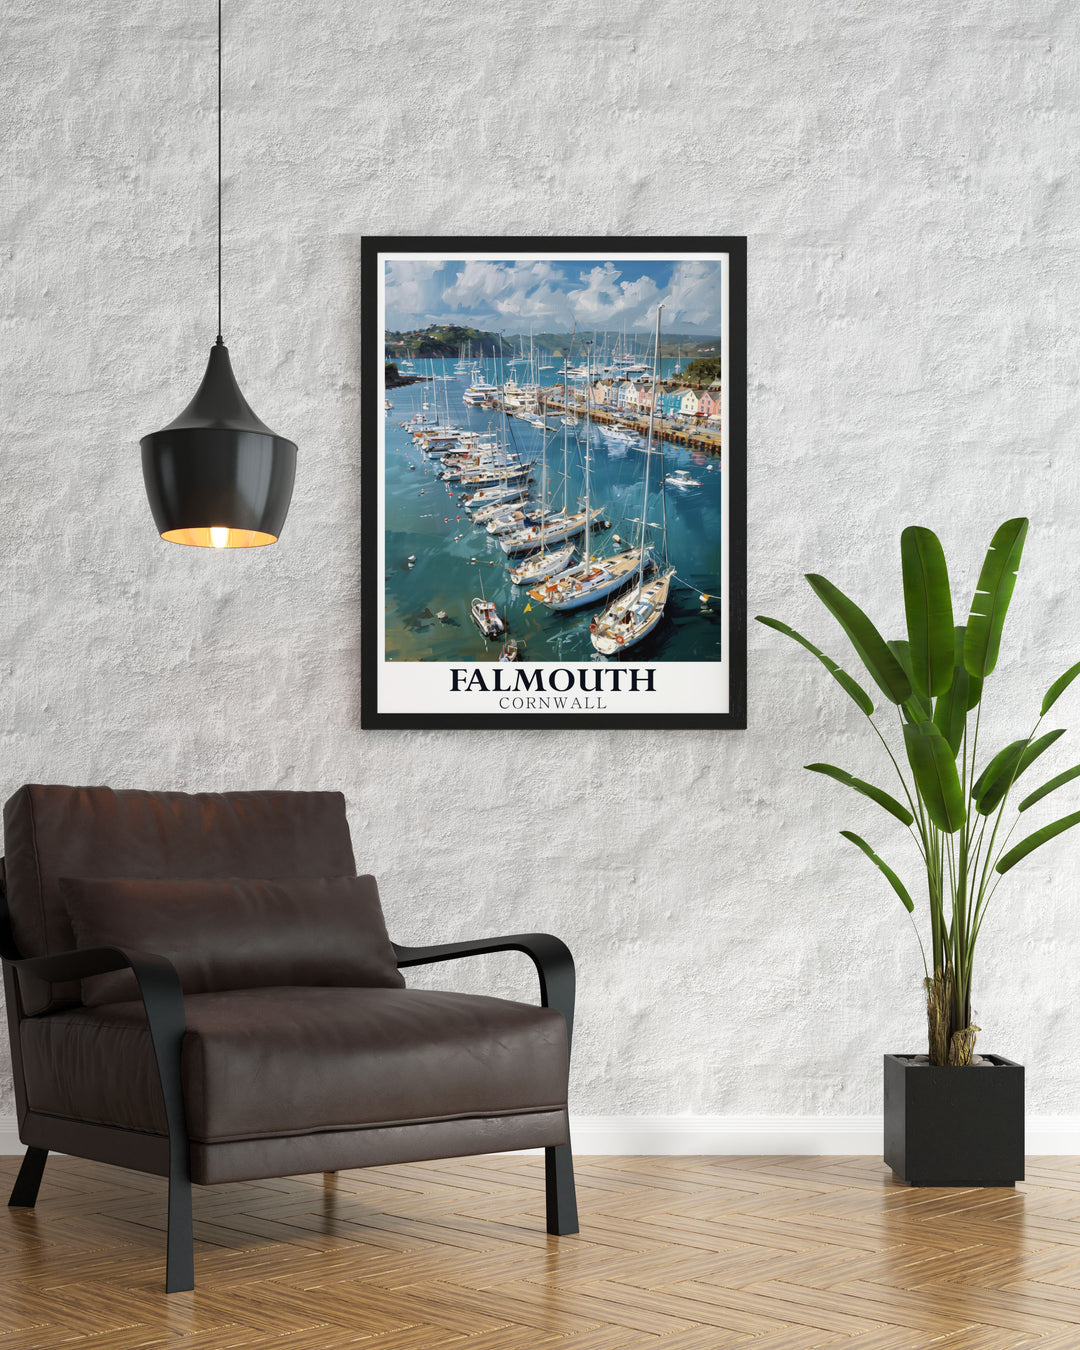 Cornwall poster depicting the enchanting Falmouth Harbour. This vintage print brings the coastal gem to life with intricate details and vibrant colors, perfect for decorating your living room, bedroom, or office with a piece of Cornwall.